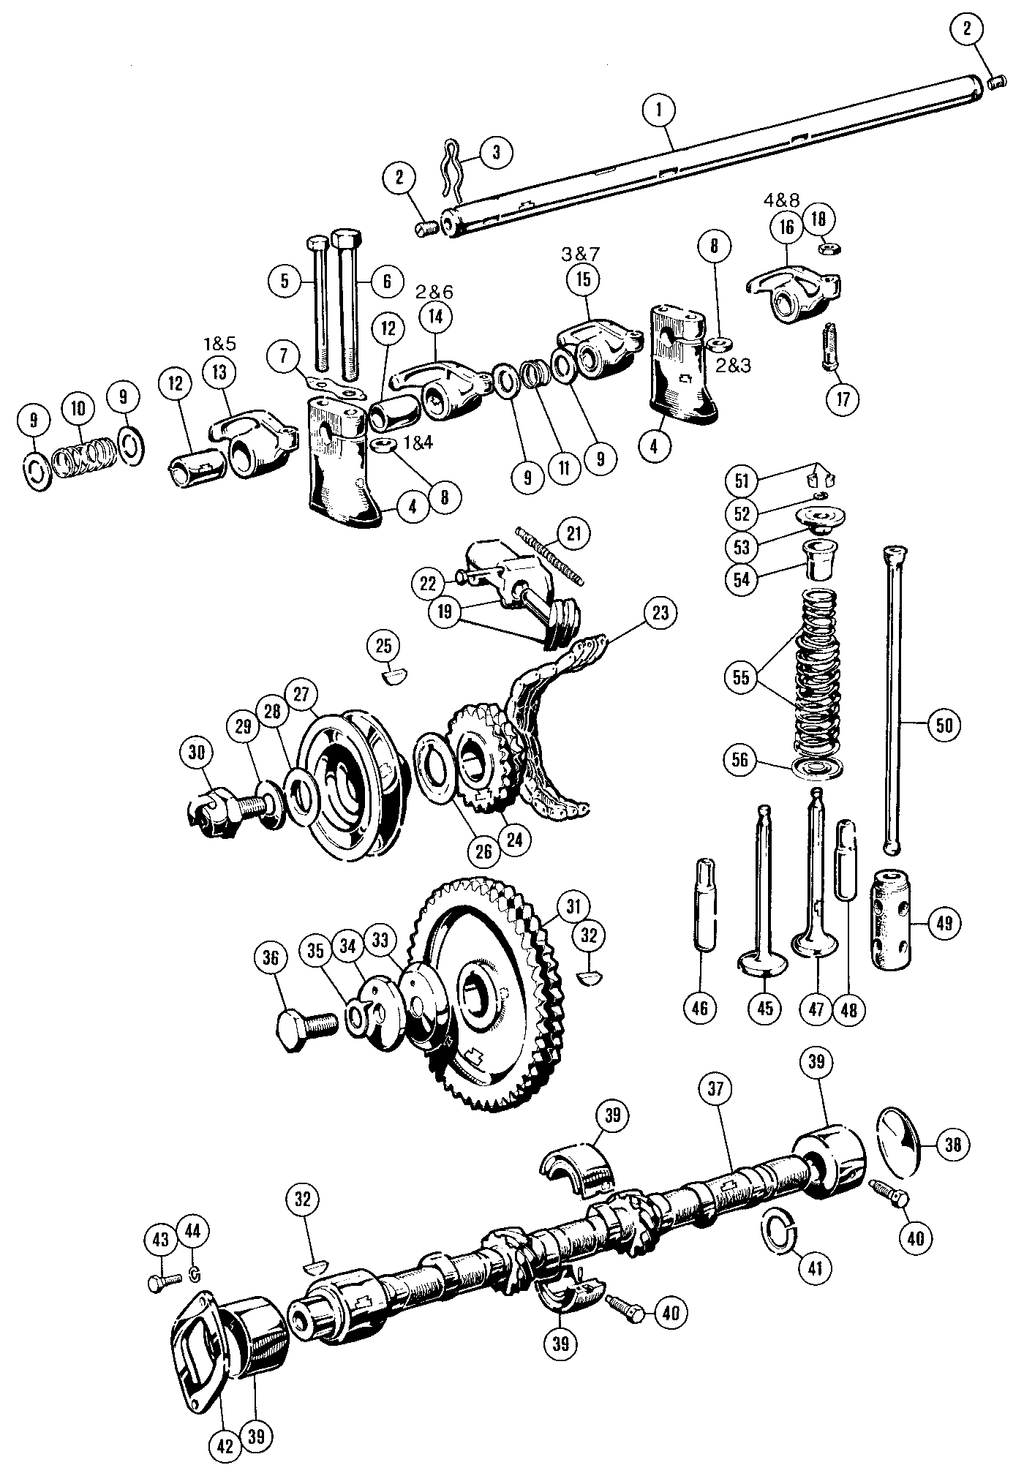 MGTD-TF 1949-1955 - Cam followers | Webshop Anglo Parts - Camshaft & valves - 1